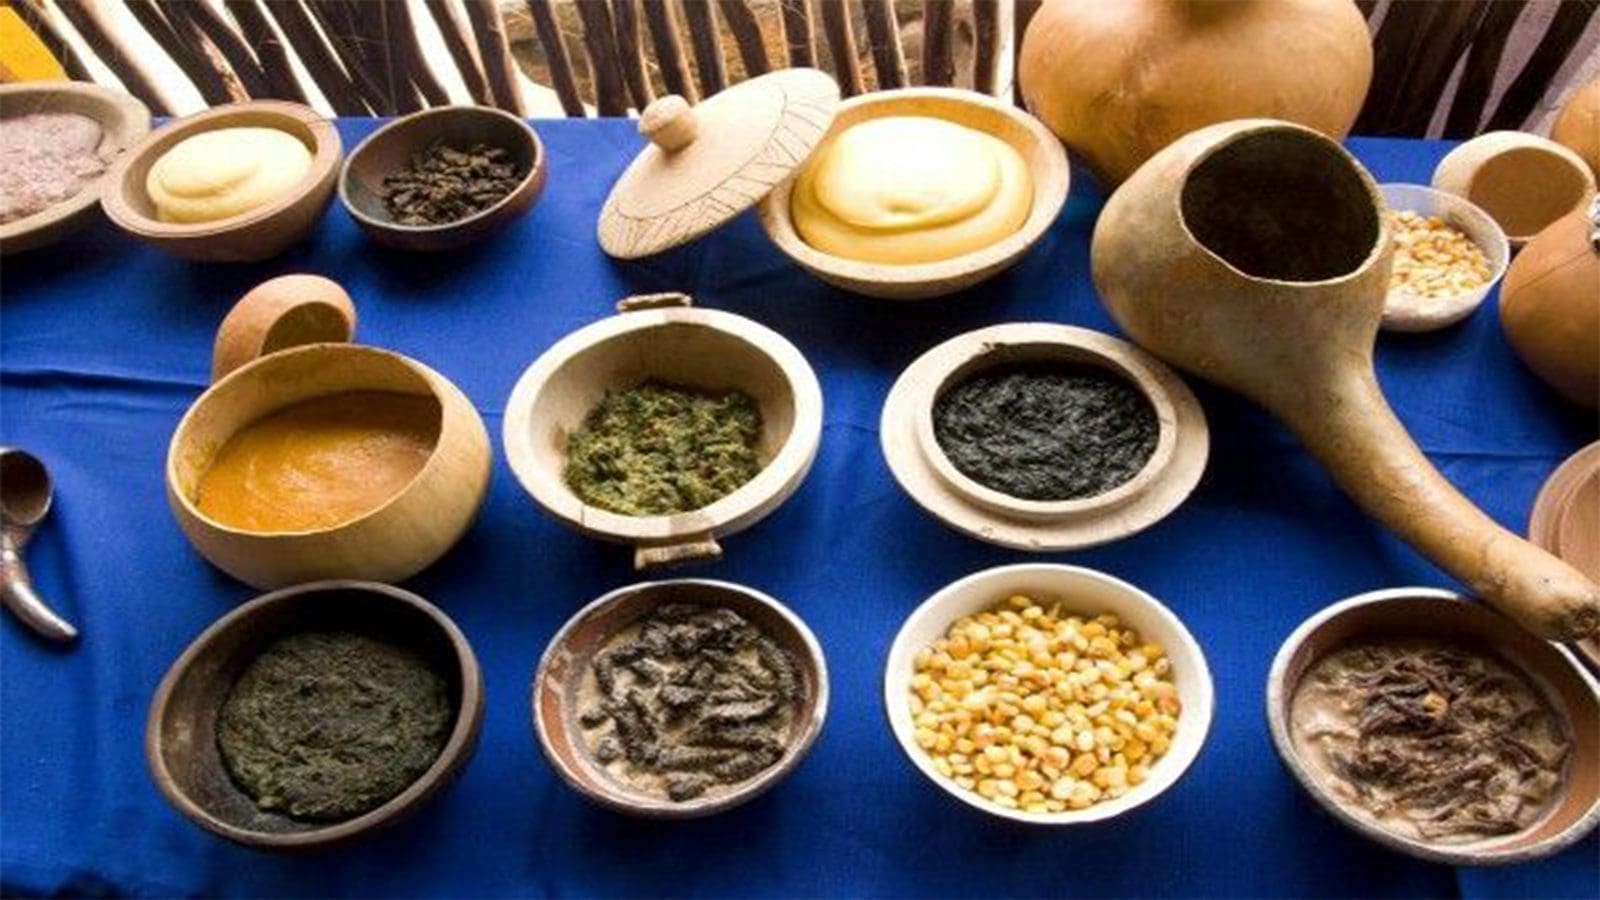 AOAC Africa, ARSO join hands to develop analytical techniques for indigenous foods in Africa